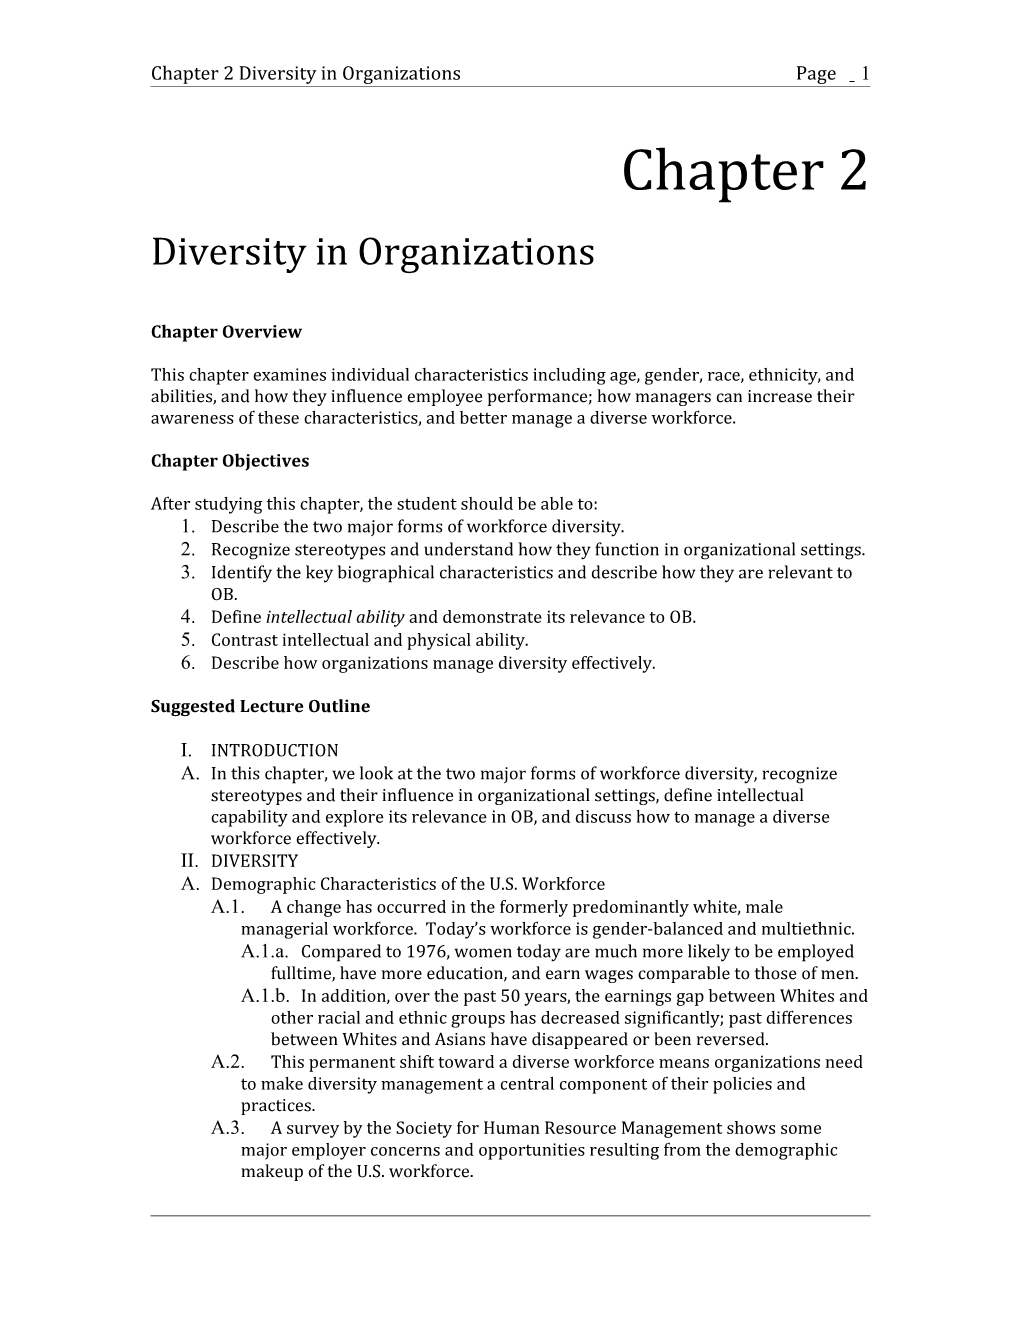 Chapter 2 Diversity in Organizationspage